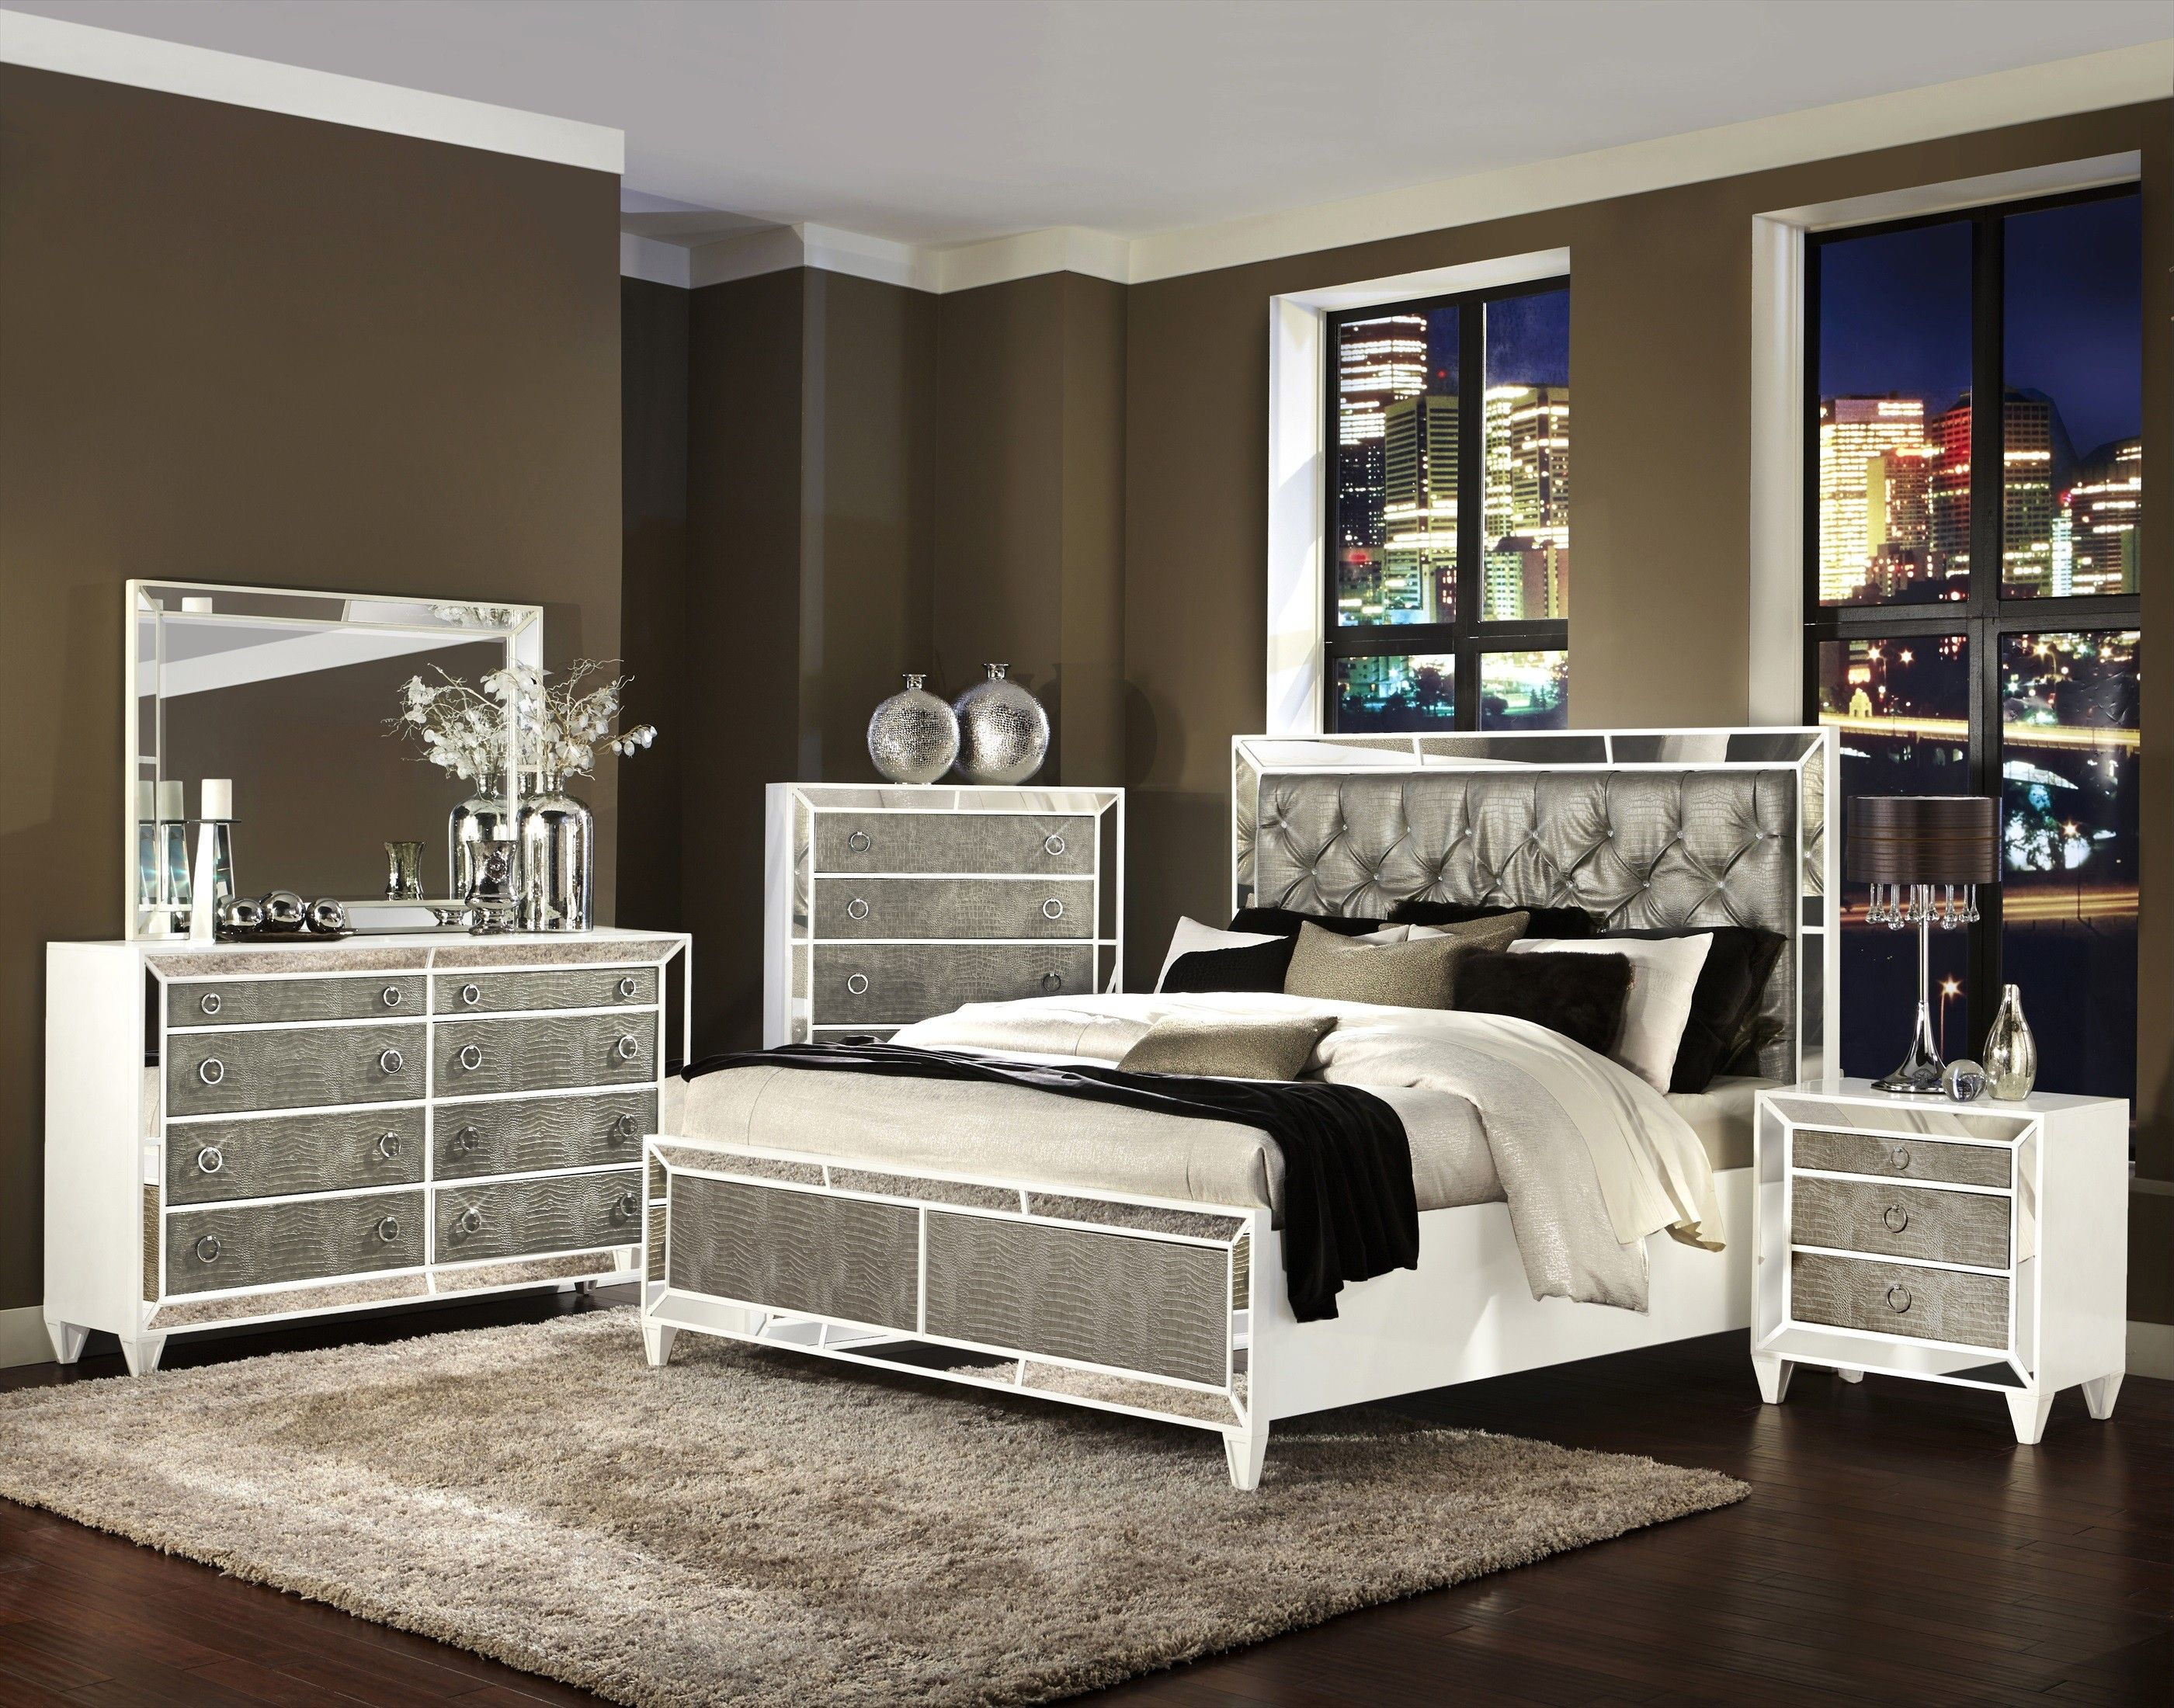 Transitional Pearlized White Design Glass Bedroom Set Glass inside size 2800 X 2200